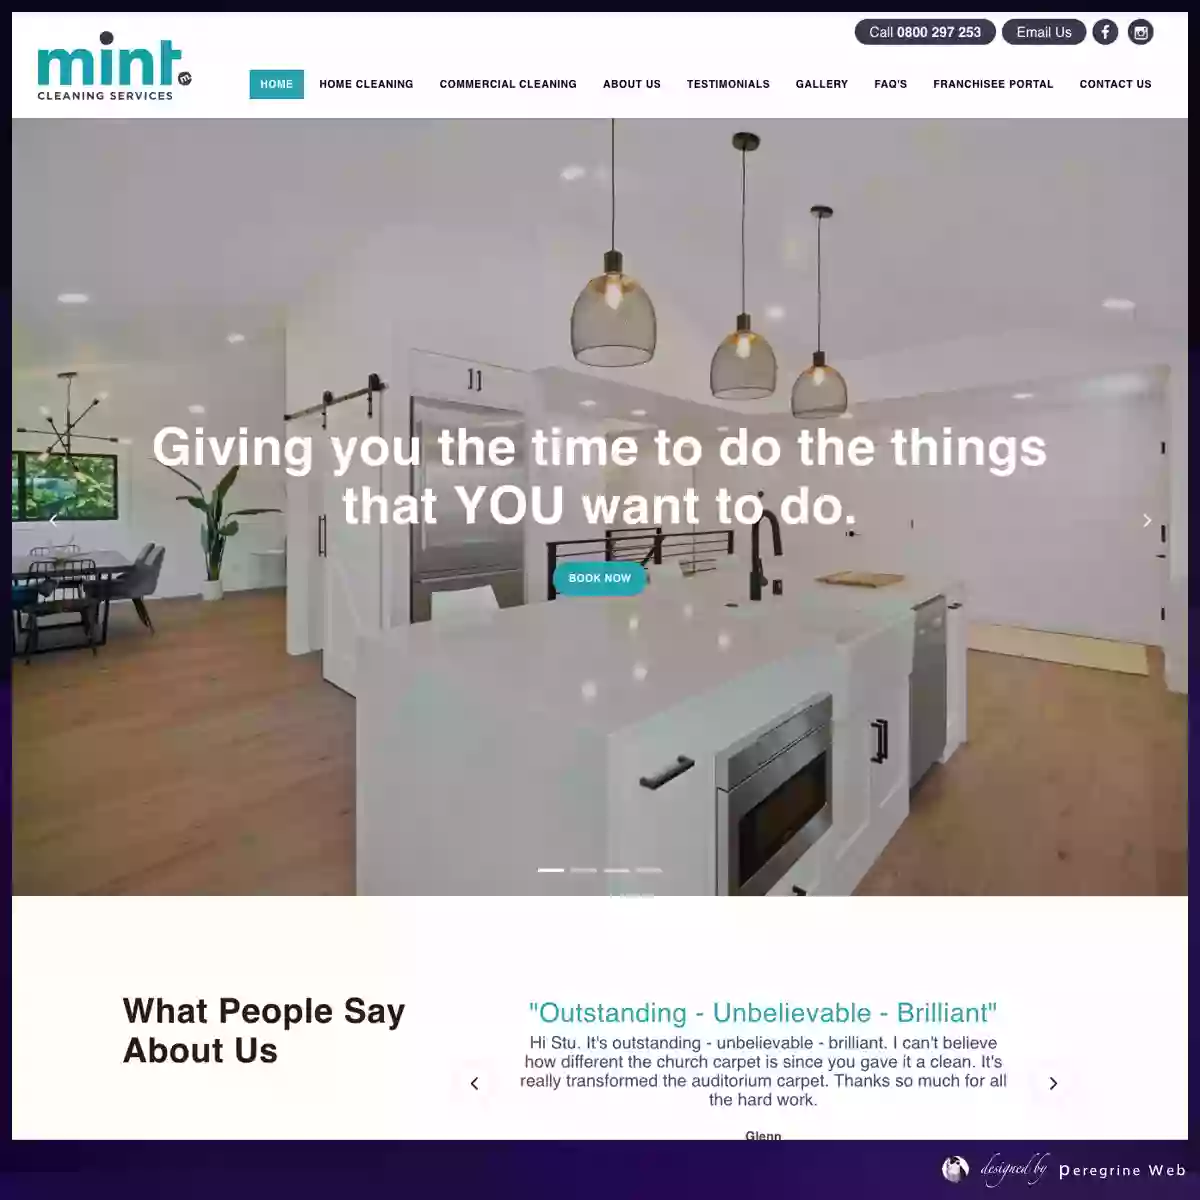 Mint cleaning services